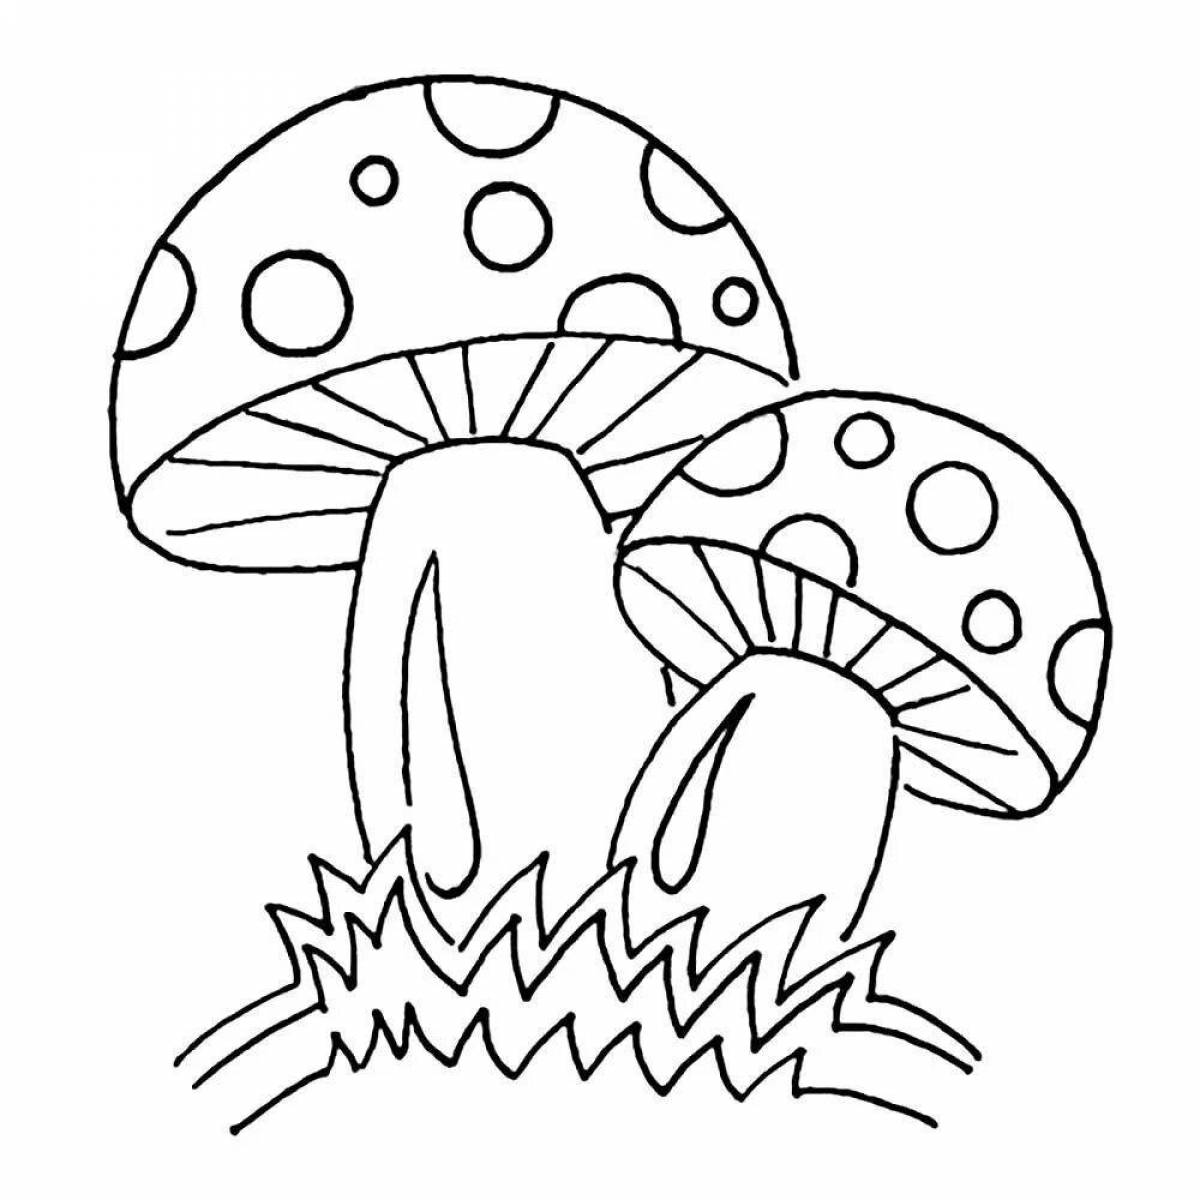 Coloring dazzling mushrooms for children 4-5 years old